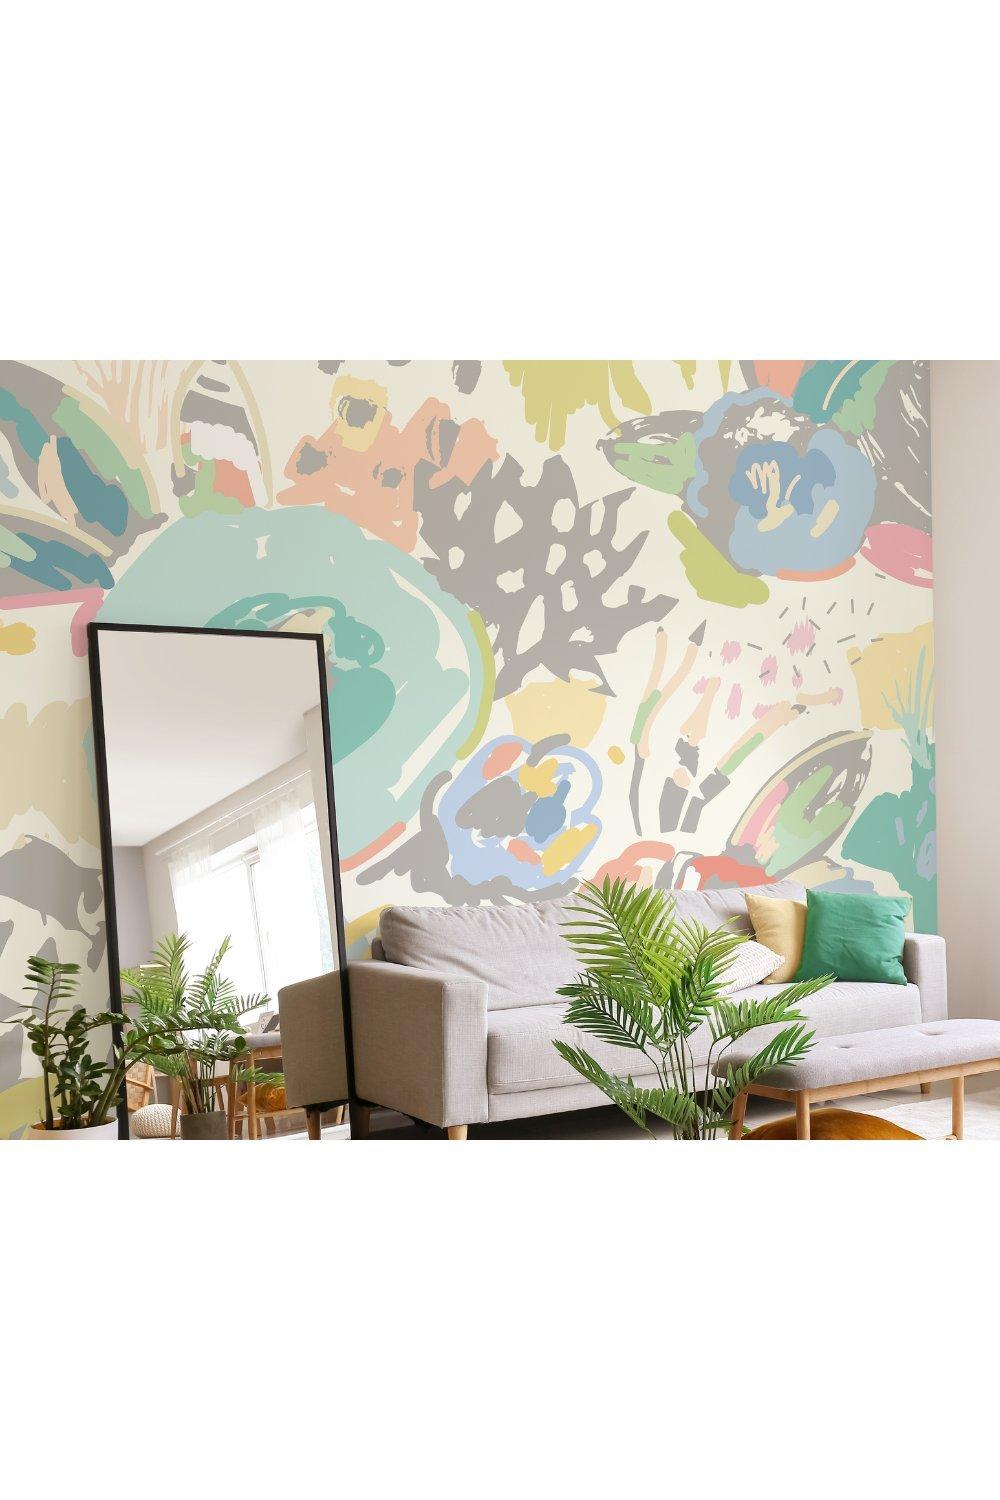 Abstract Floral Matt Smooth Paste the Wall Mural 300cm wide x 240cm high